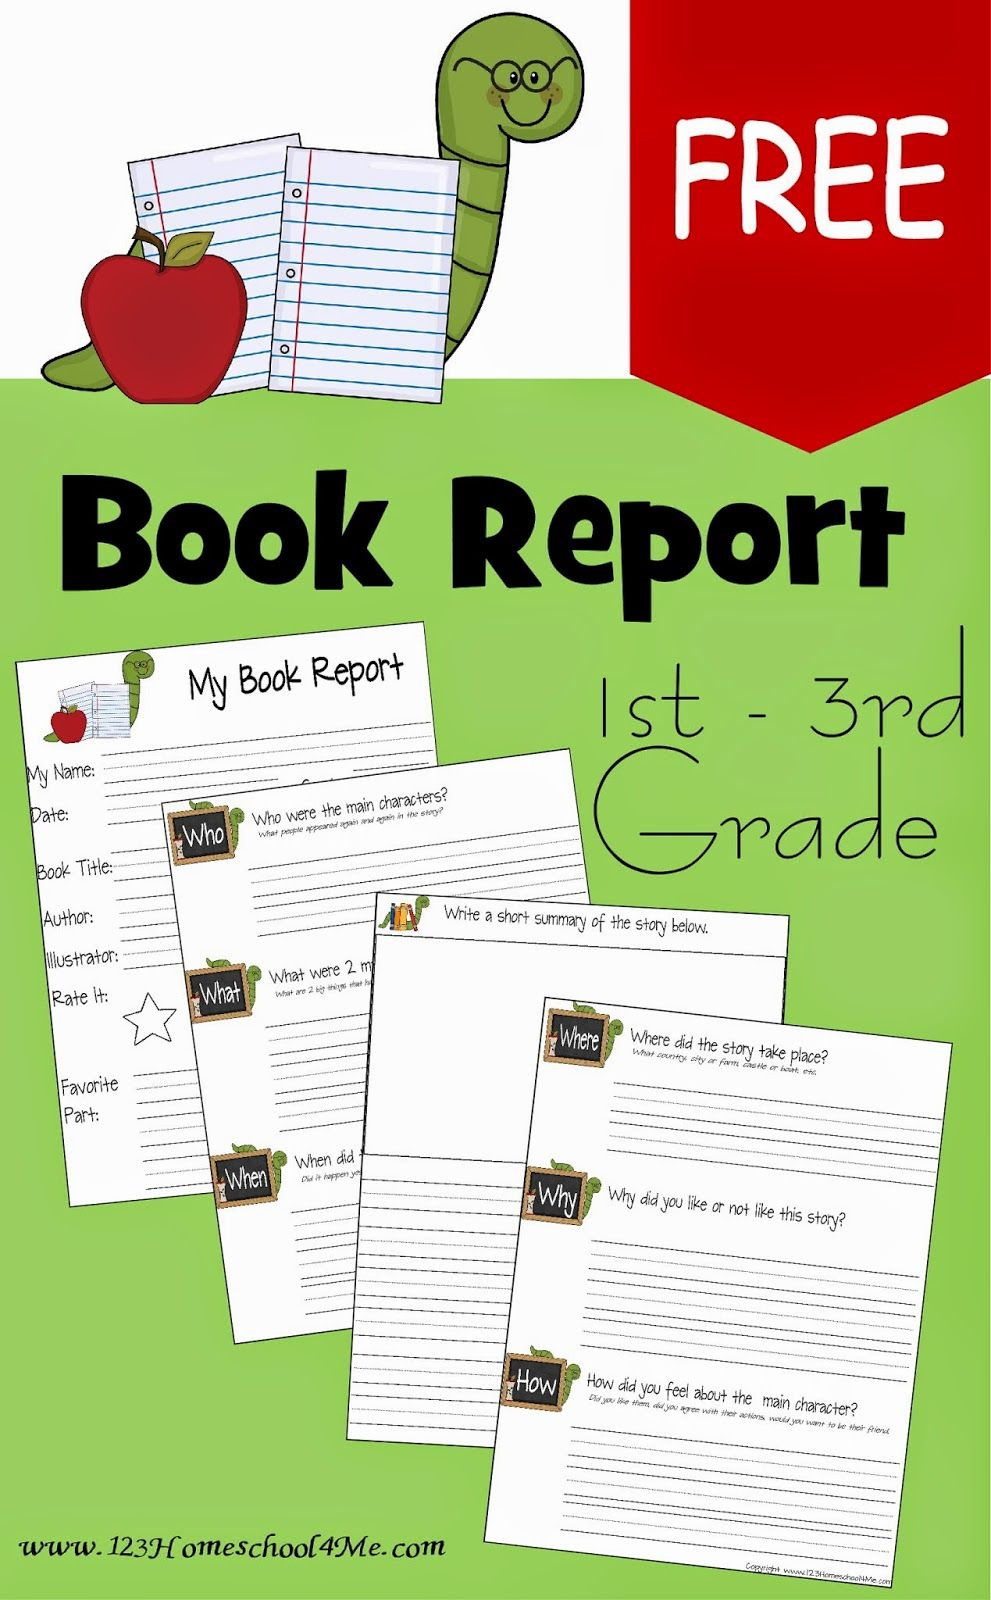 Free Book Report Template | Play Activities For Kids | 3Rd Grade - Free Printable Book Report Forms For Second Grade